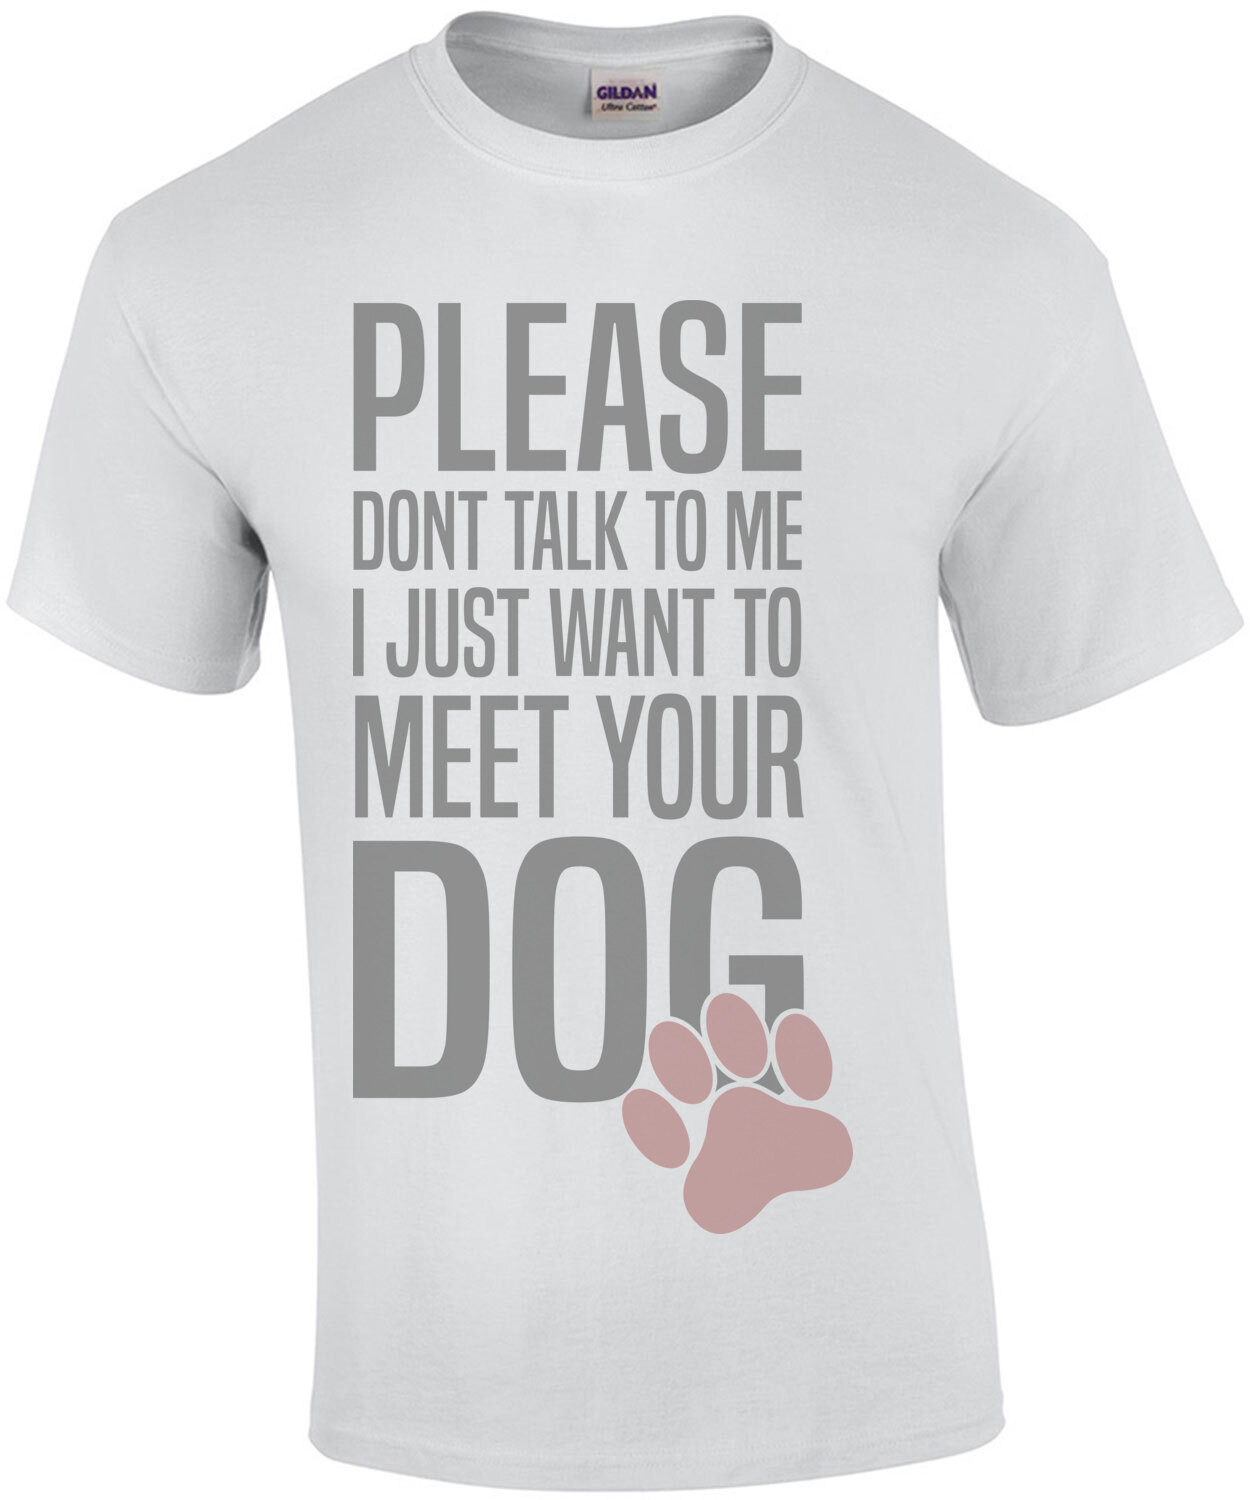 Please don't talk to me I just want to meet your dog - funny dog t-shirt